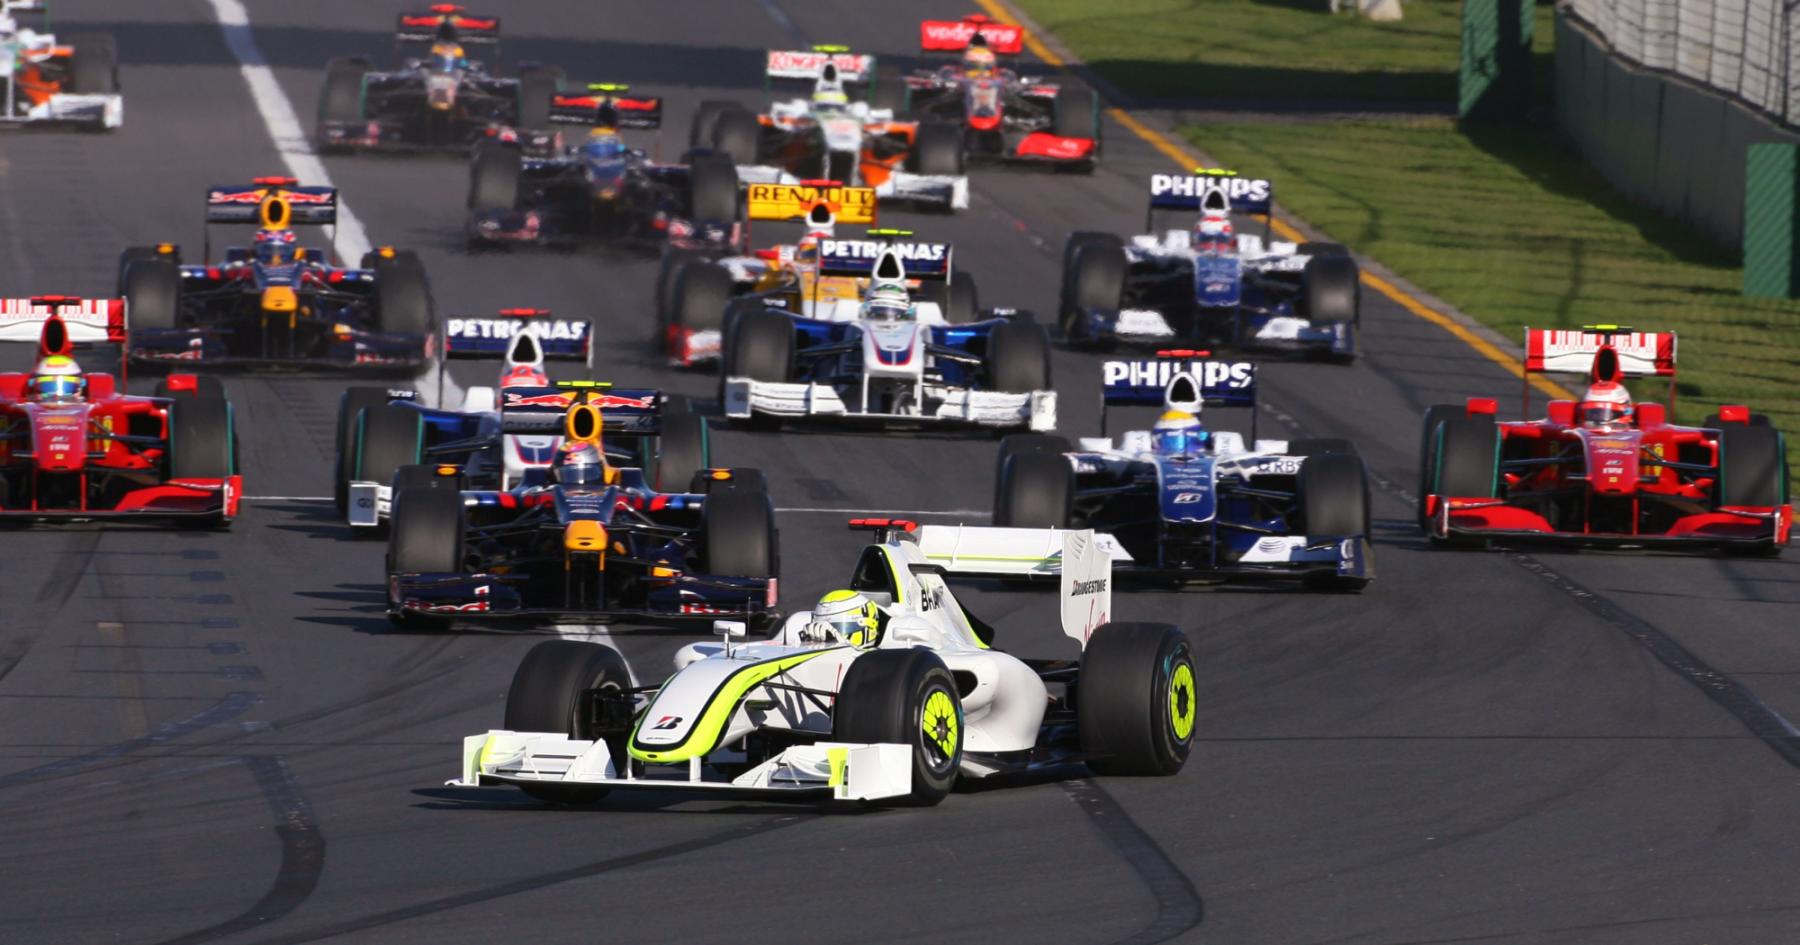 When Button and Brawn GP shocked the F1 world